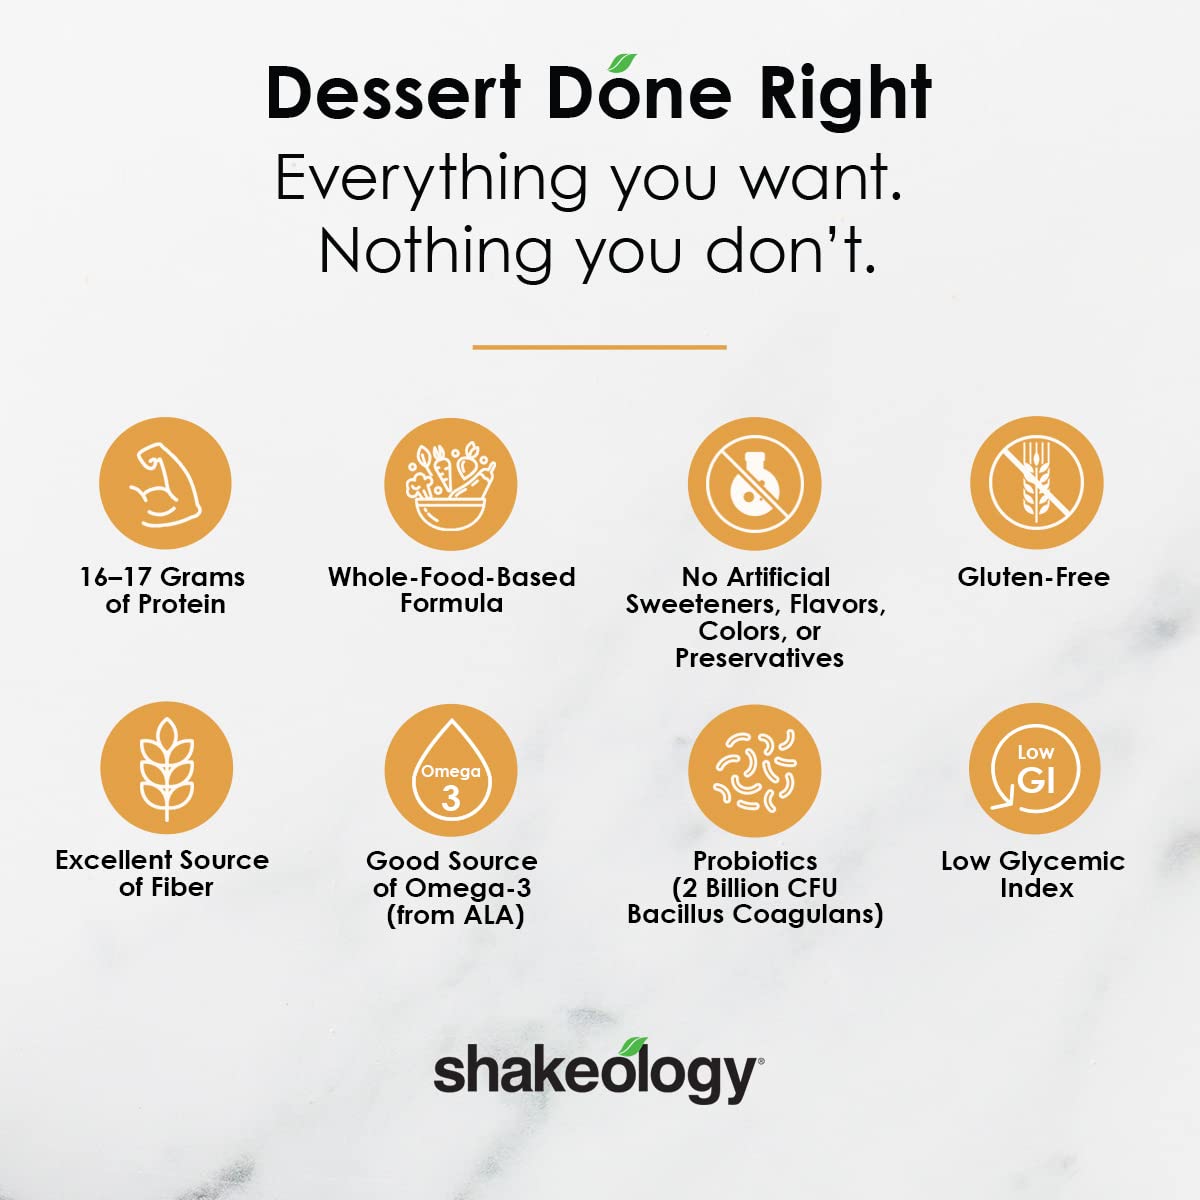 Shakeology Healthy Dessert powder, Superfood Meal Shake with Whey Protein, Probiotics, Adaptogens, and Vitamins (Chocolate, 30 day supply)